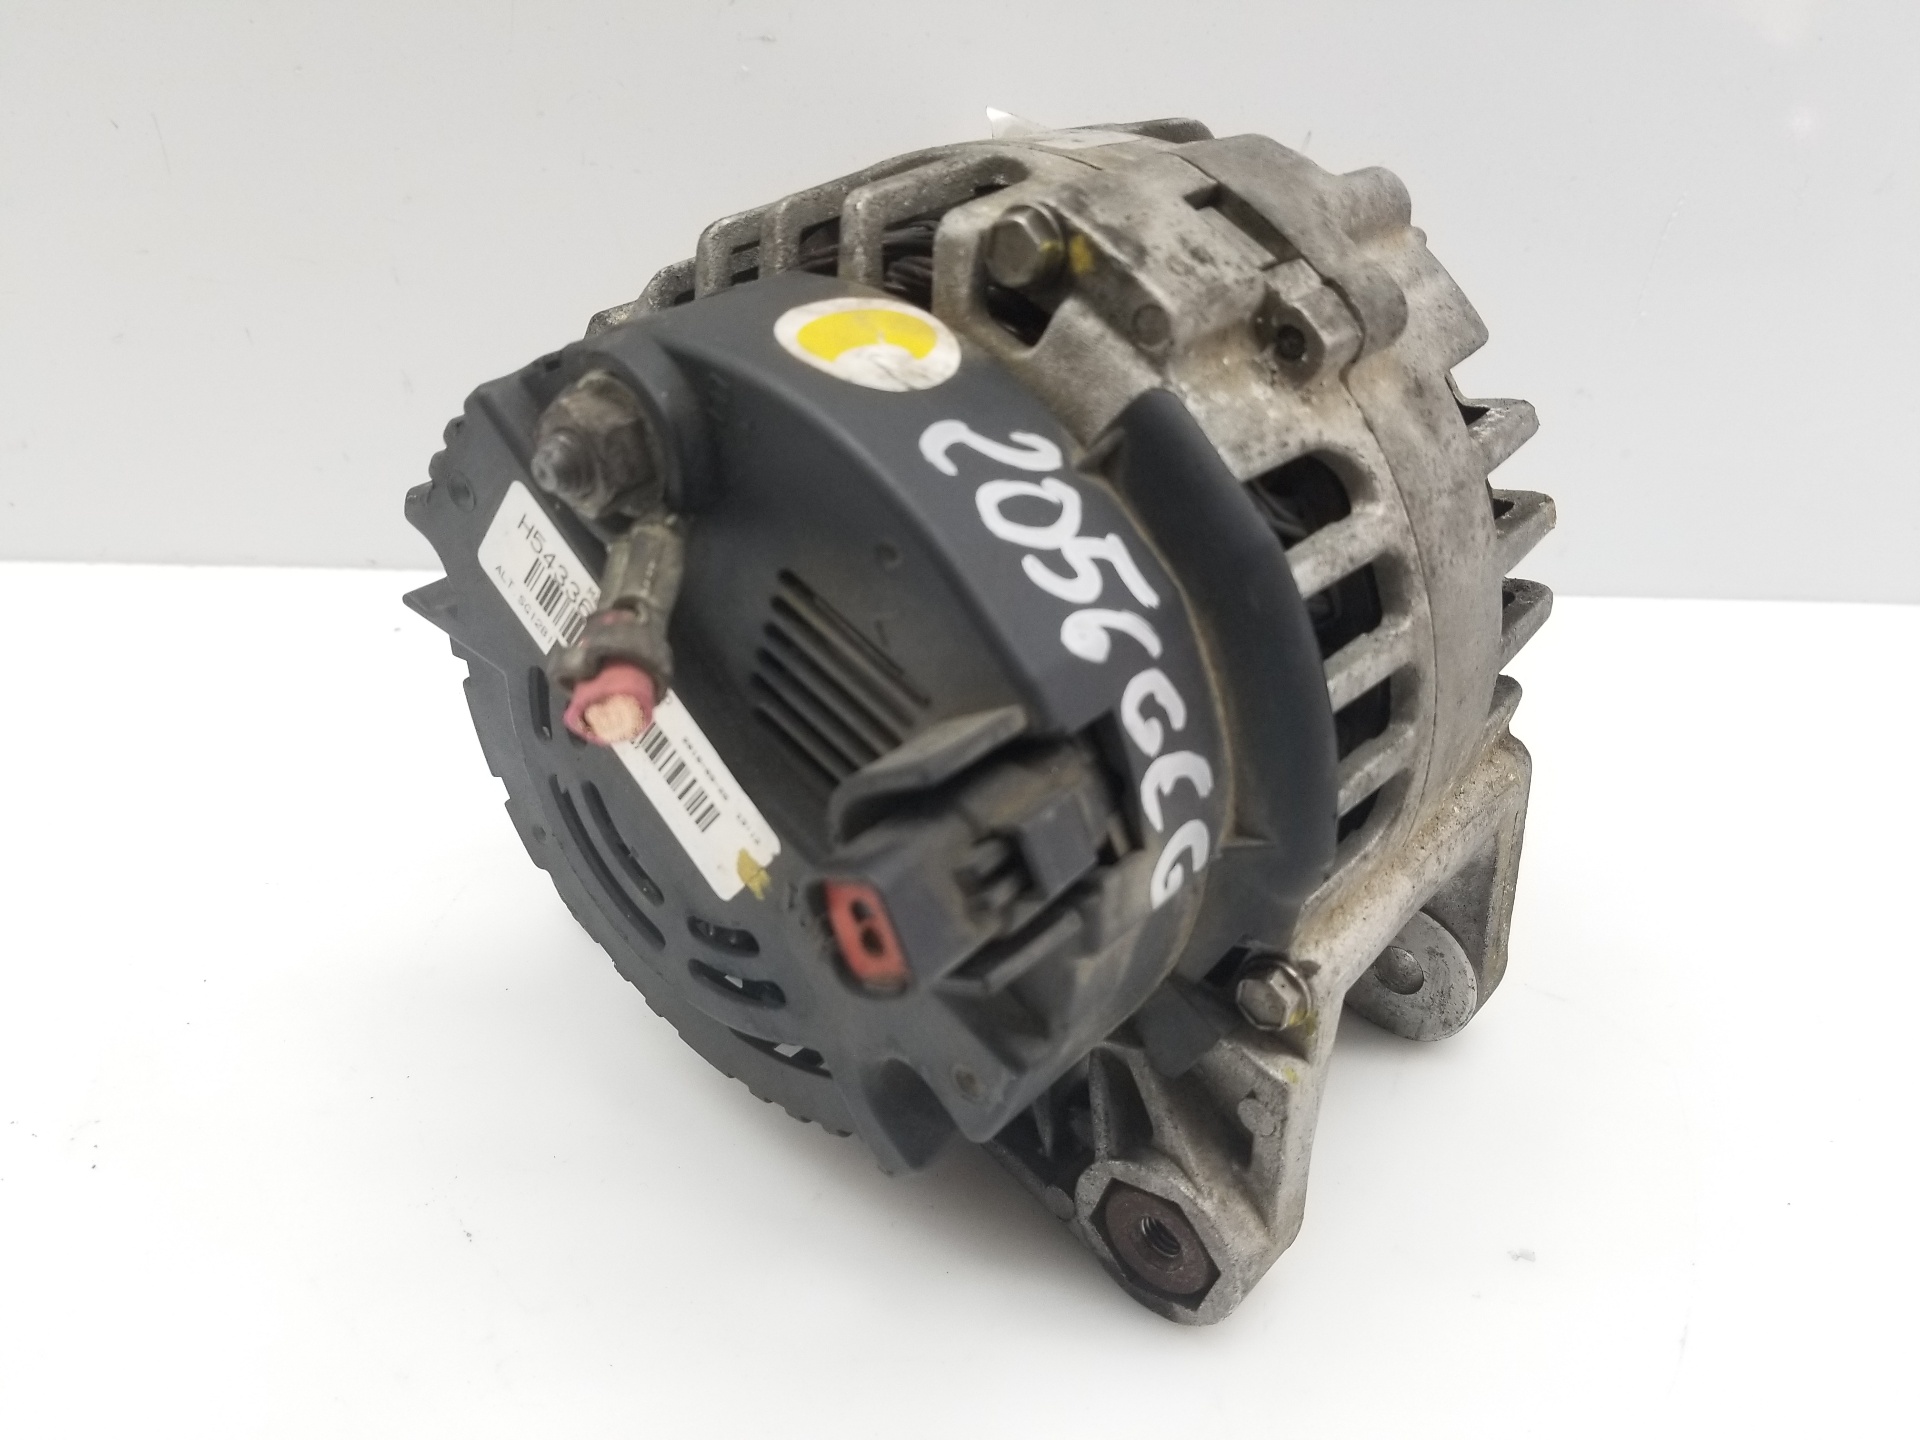 RENAULT Scenic 2 generation (2003-2010) Alternator H543366A, H543366A 25231407